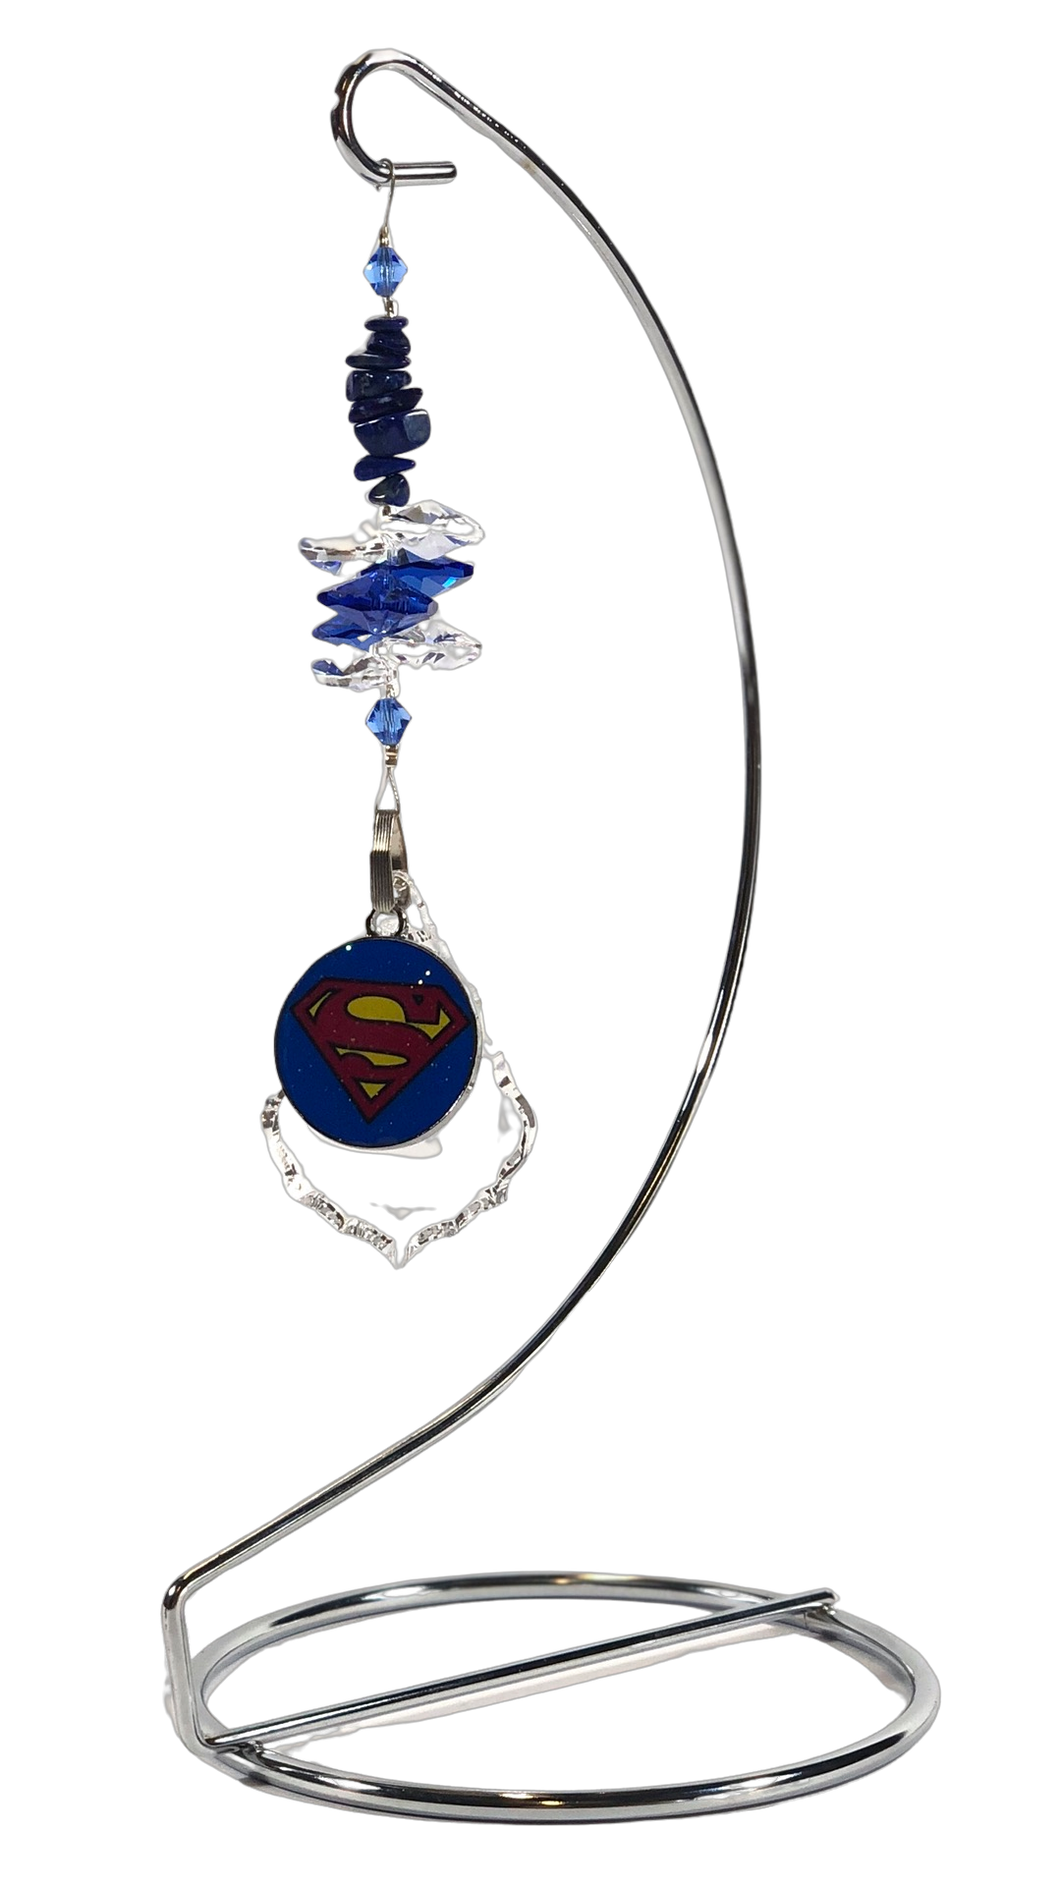 Superman - DC Comics crystal suncatcher is decorated with lapis lazuli gemstones and come on this amazing stand.